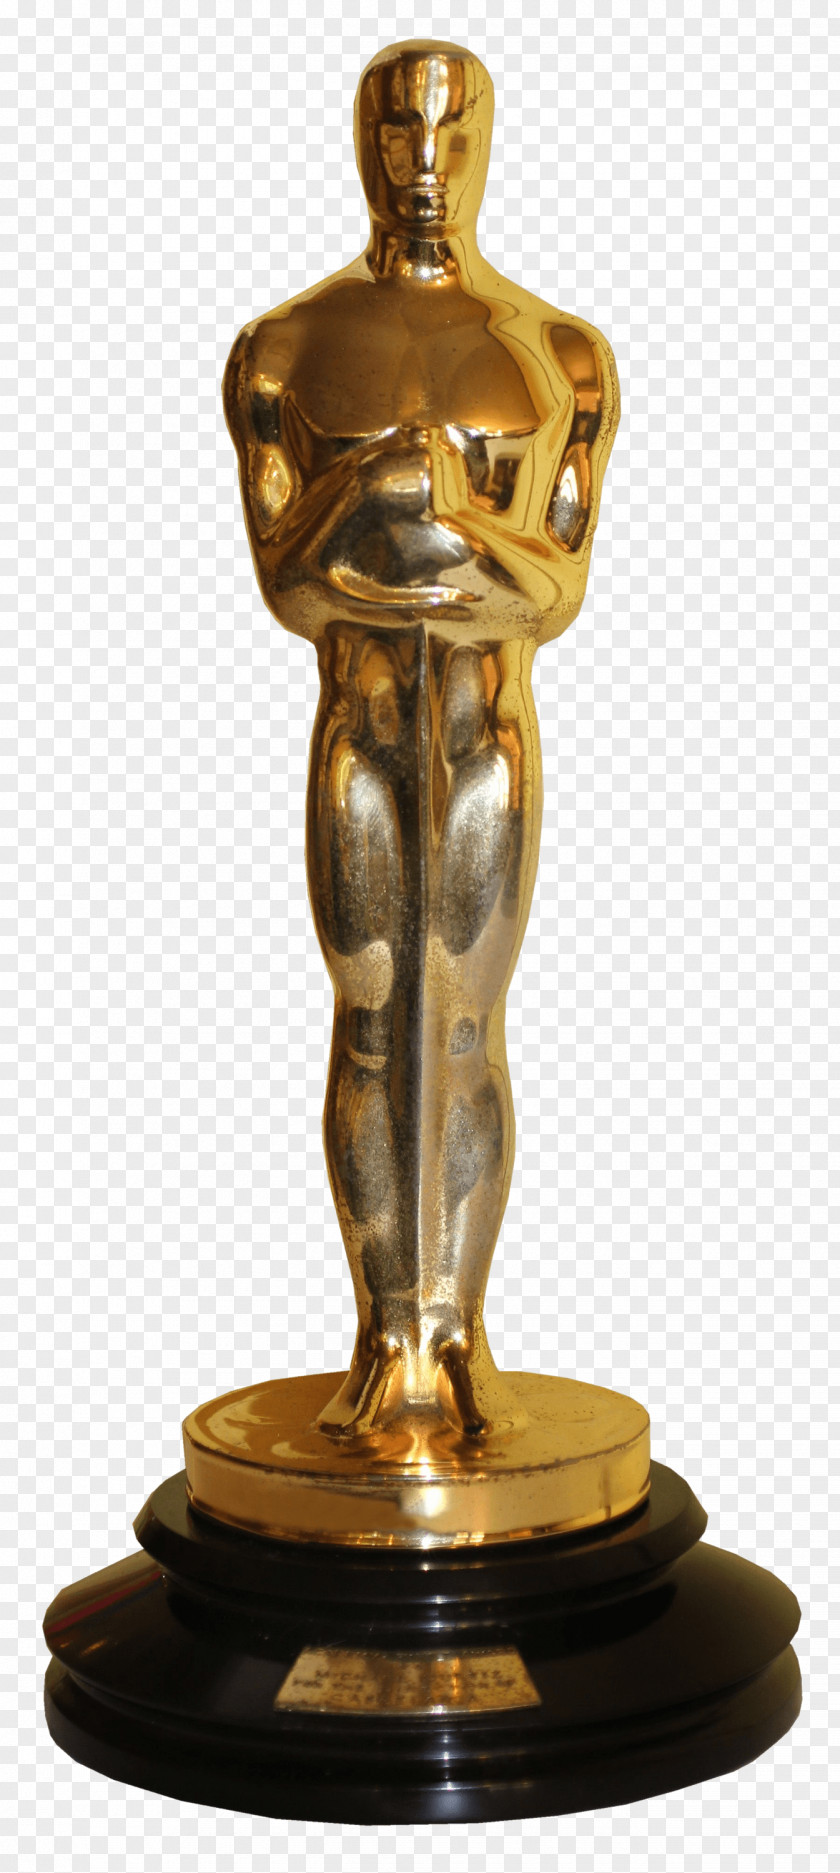 Golden Man Trophy 88th Academy Awards 48th Award For Best Picture PNG